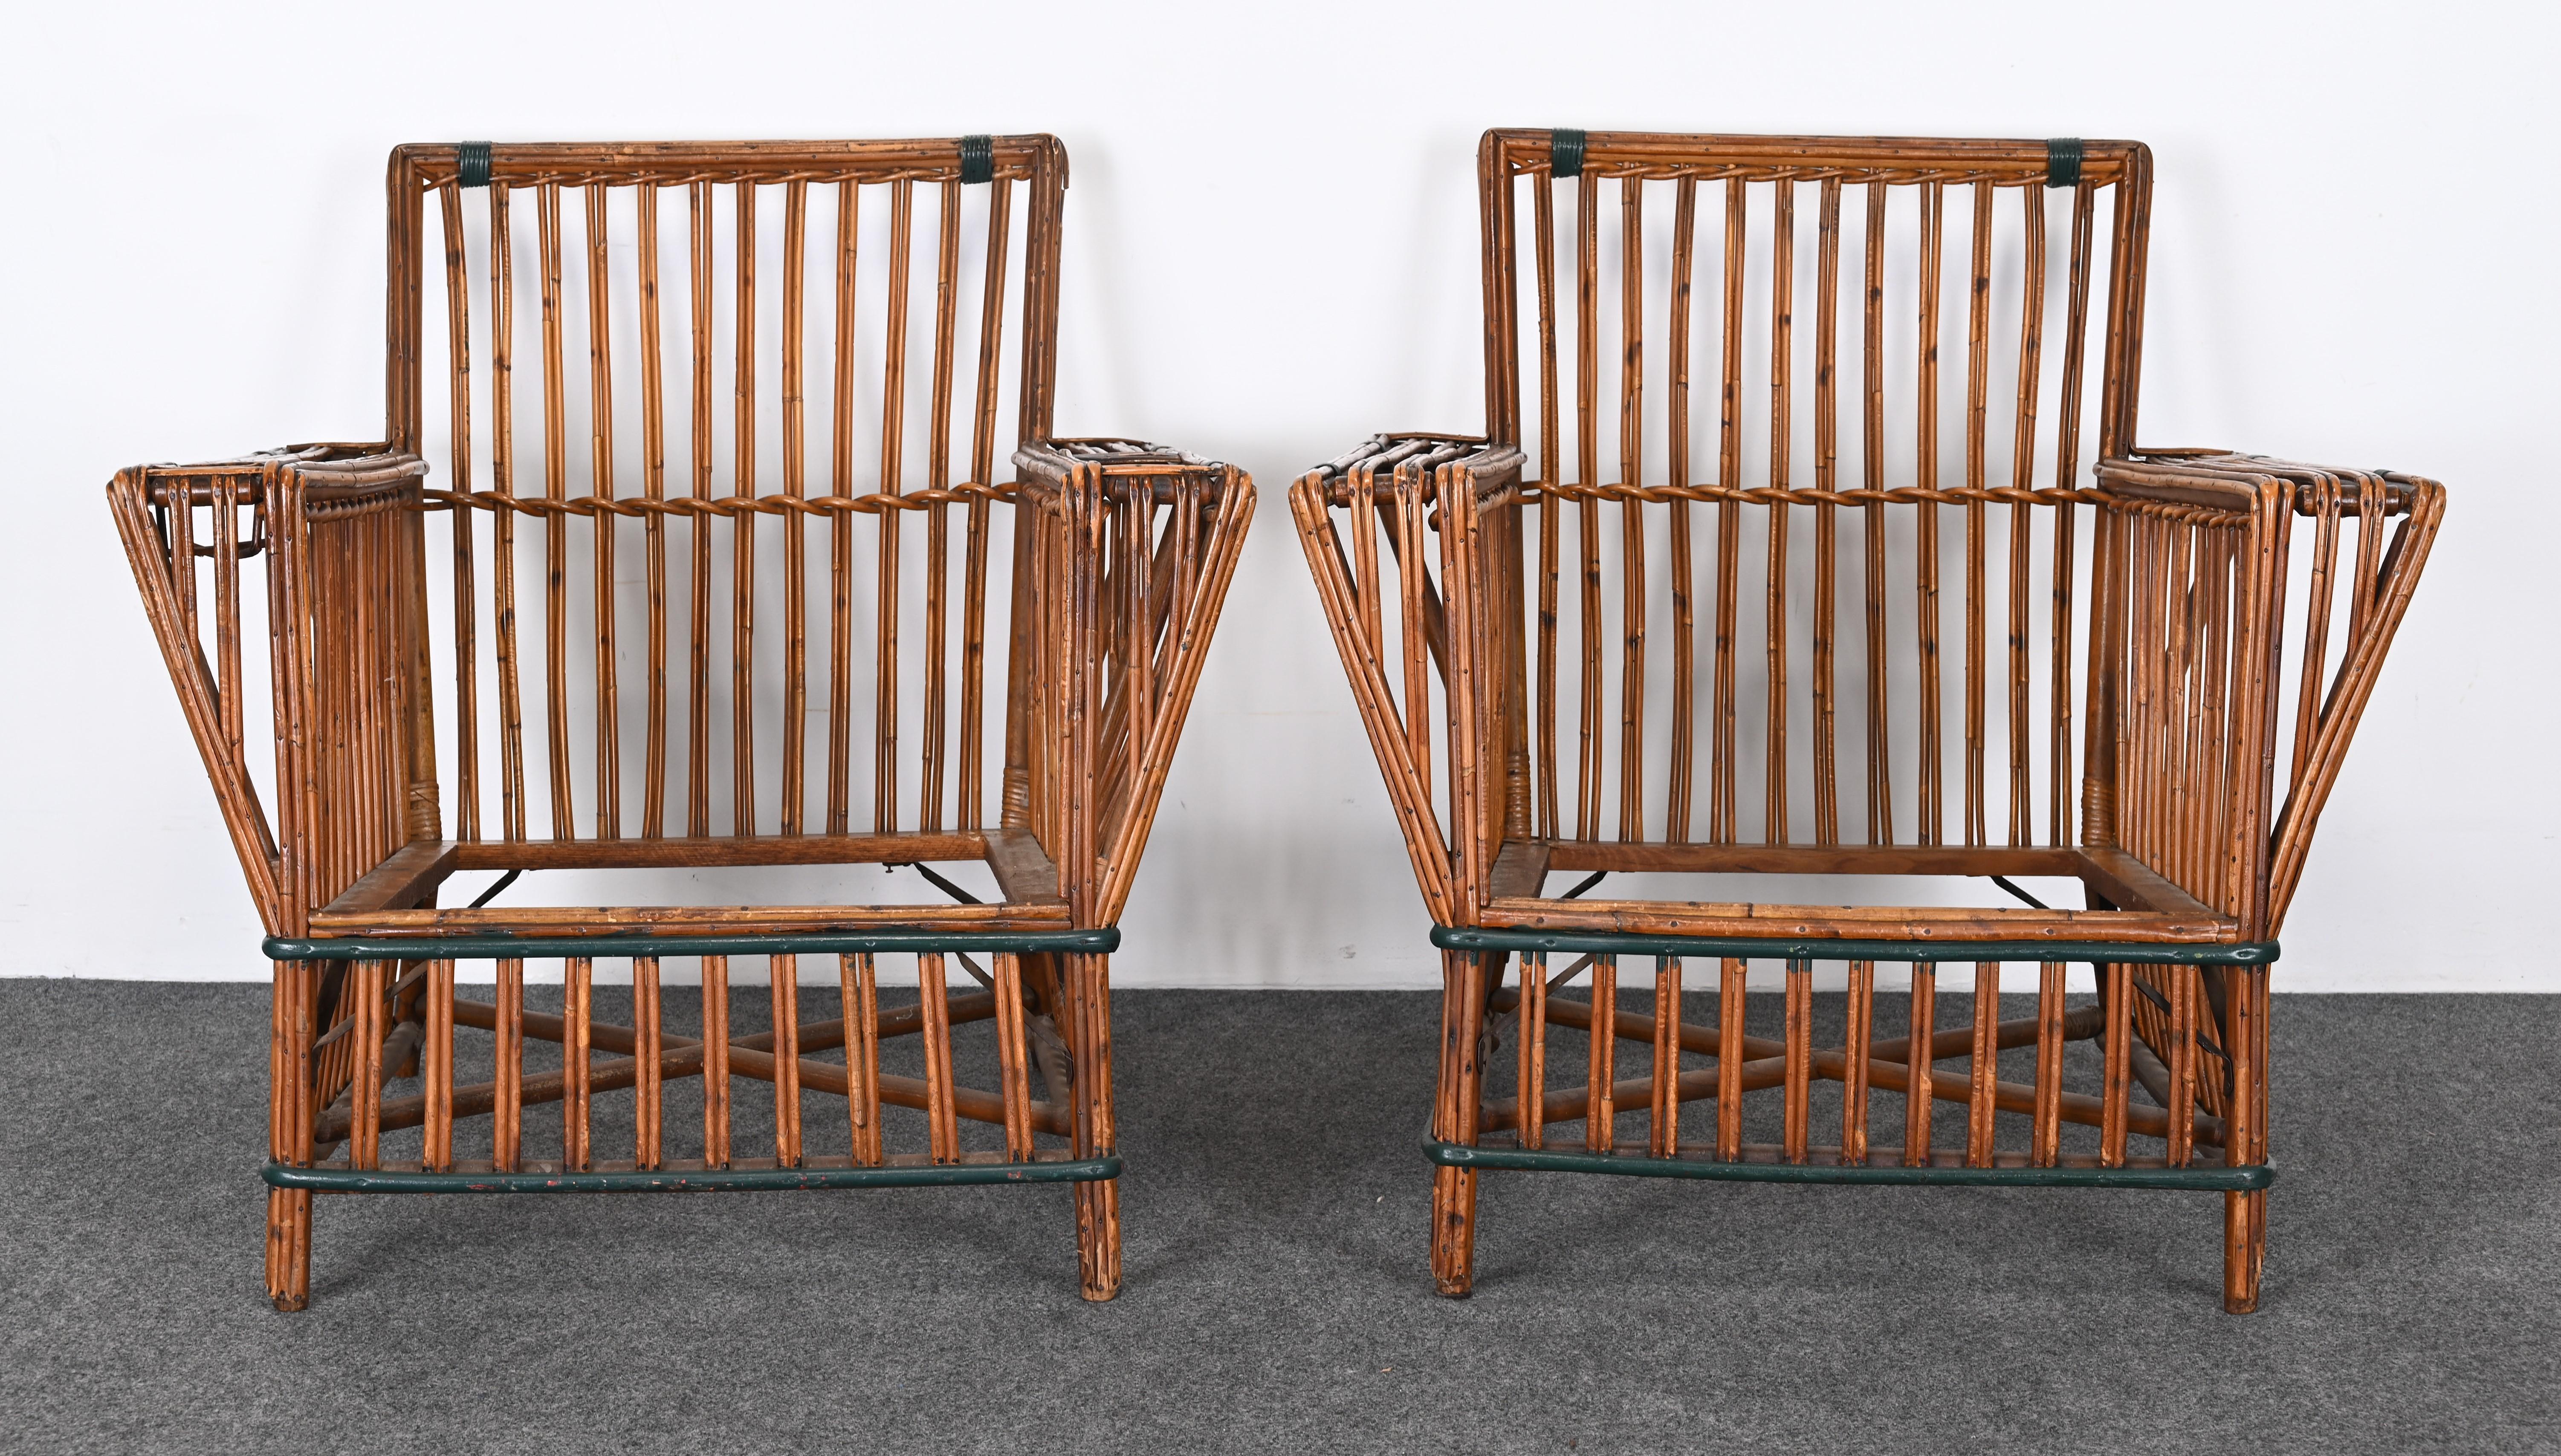 Art Deco Split Ypsilanti Stick Reed Wicker or Sofa with Pair Arm Chairs c. 1930s For Sale 1